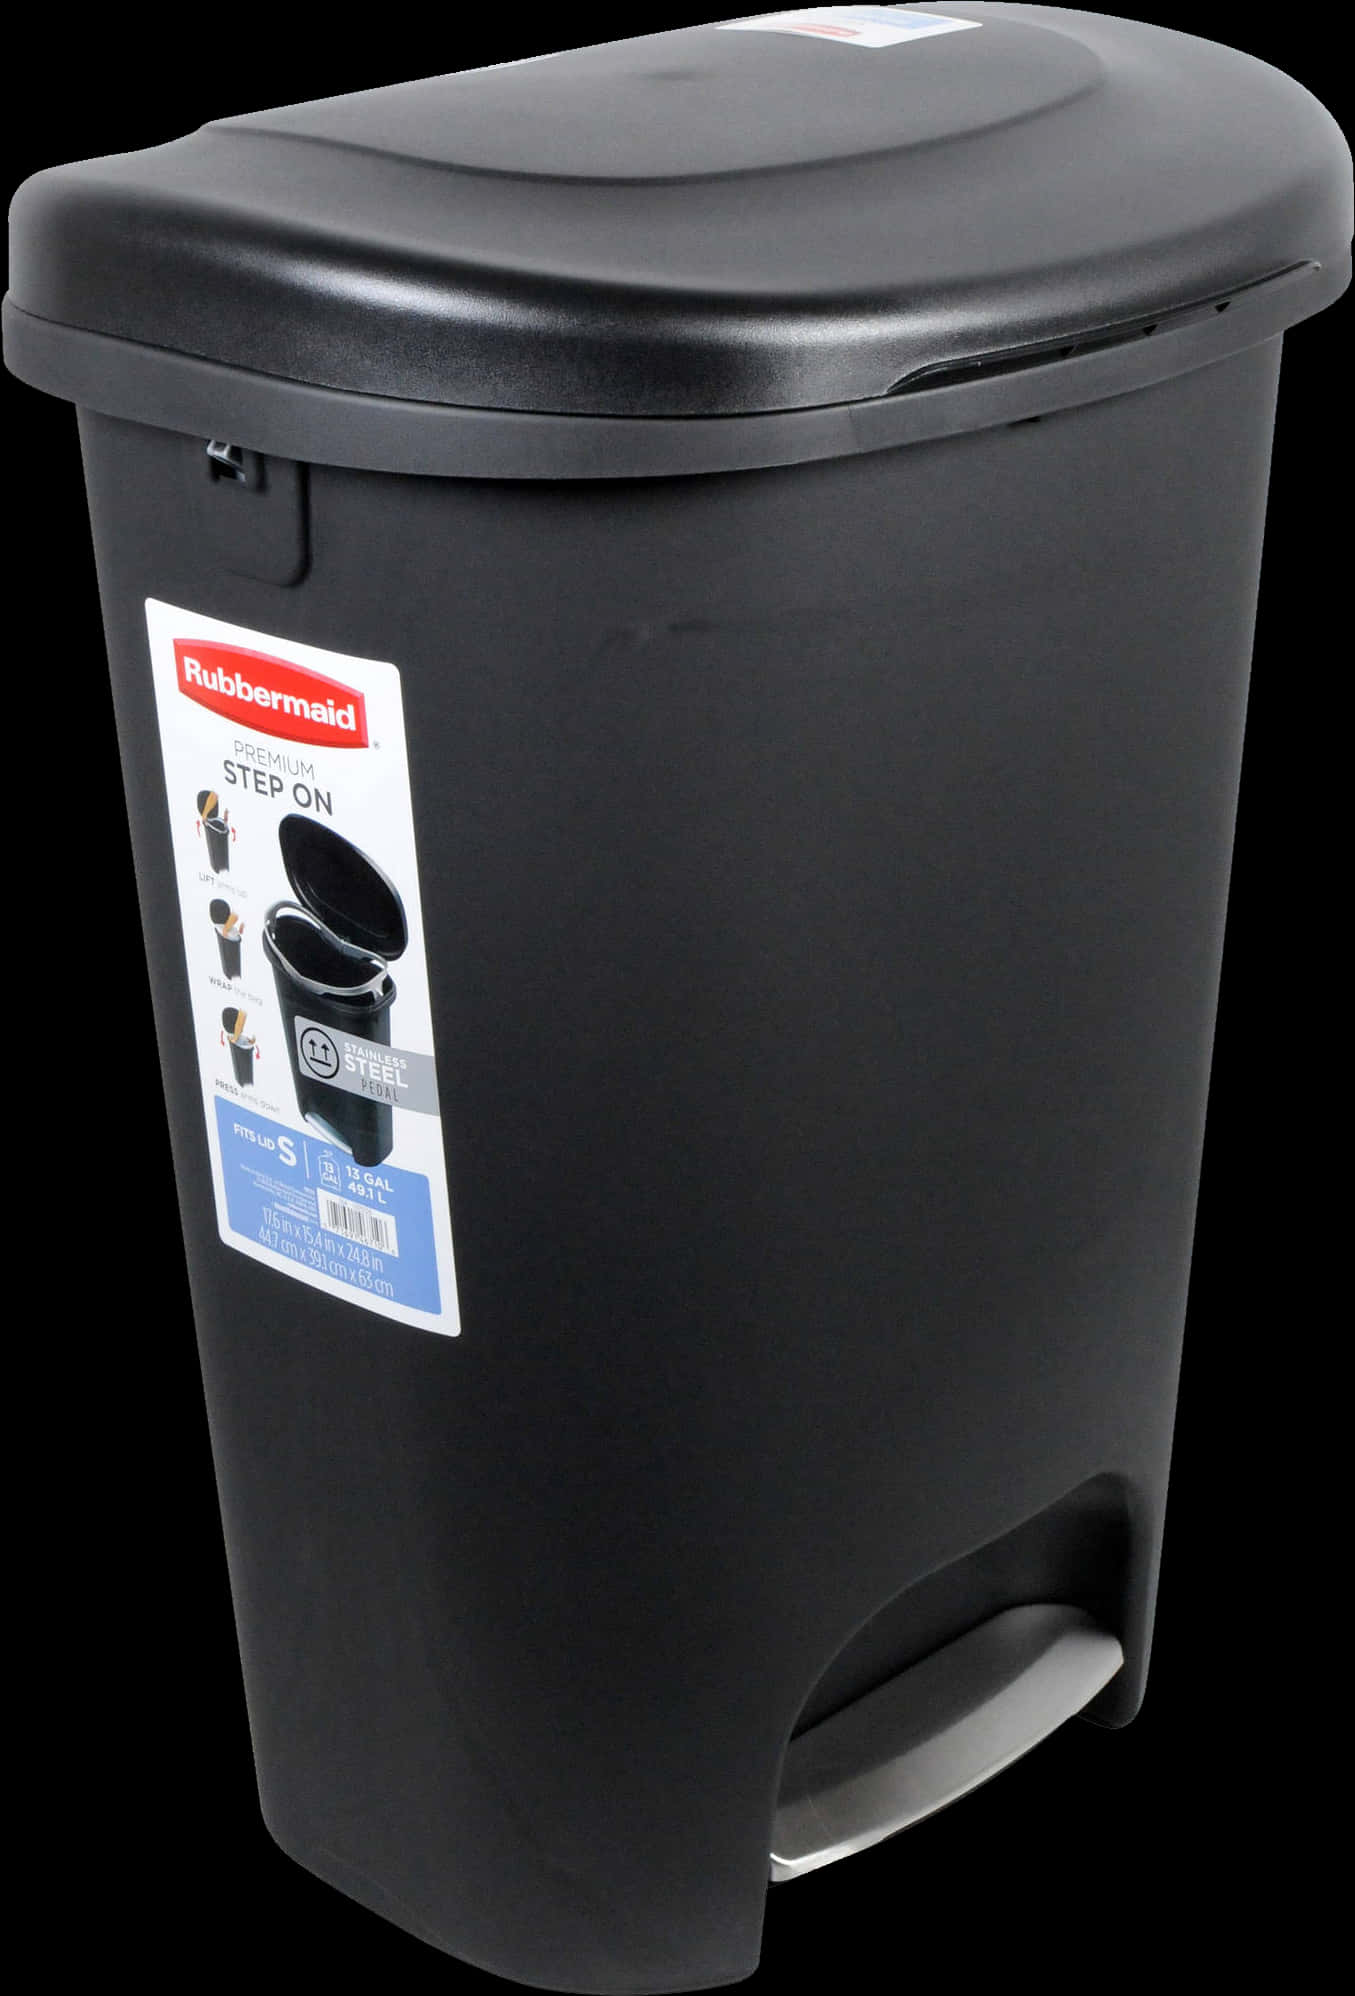 Rubbermaid Step On Trash Can PNG